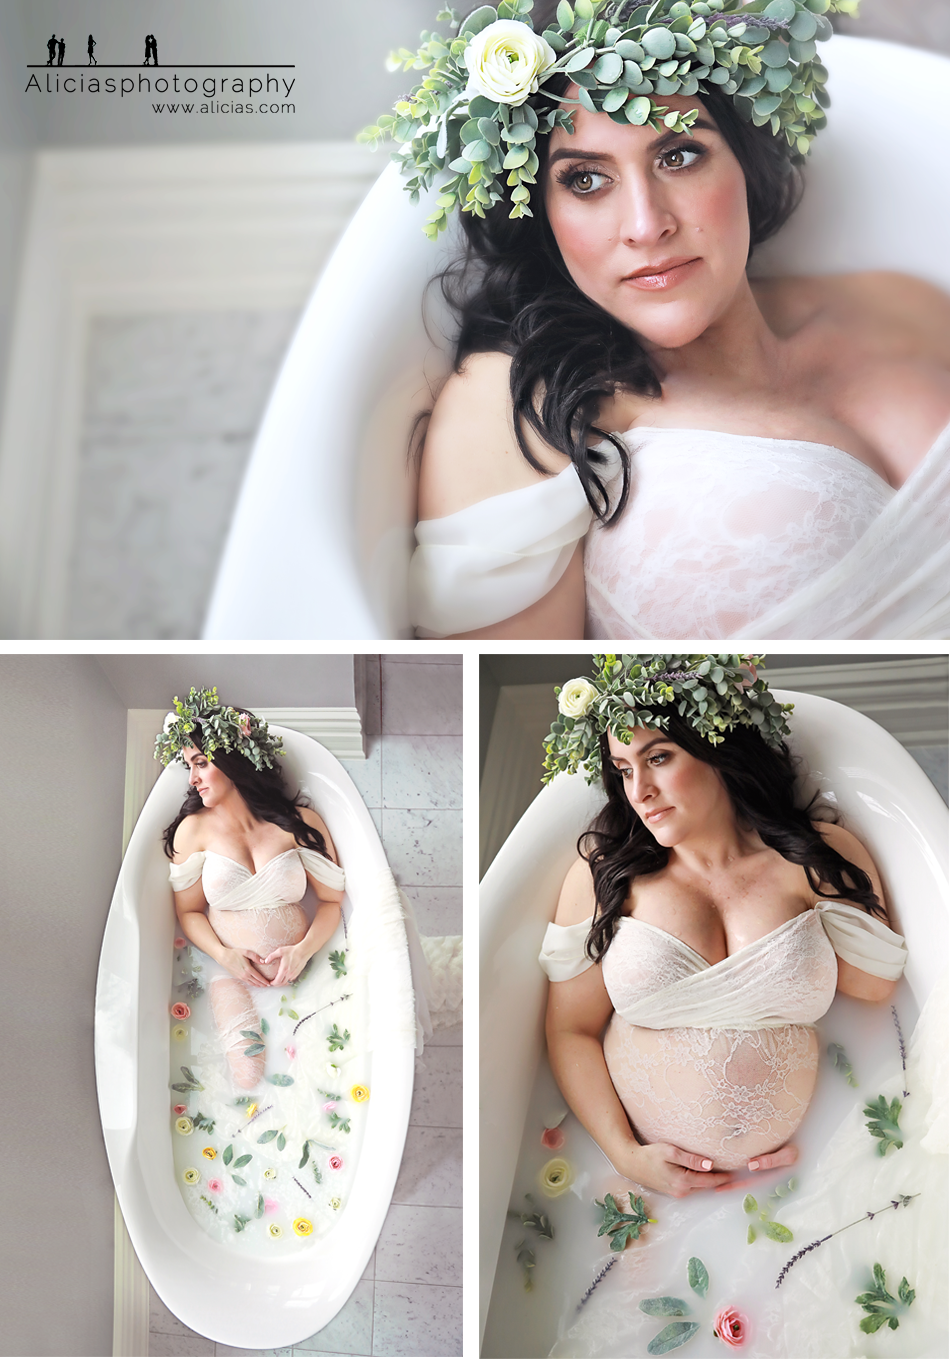 Romantic Milk Bath Maternity Photography Session Naperville, Chicago, Alicia's Photography, Baby Bump, Pregnancy Photography, Maternity Photography